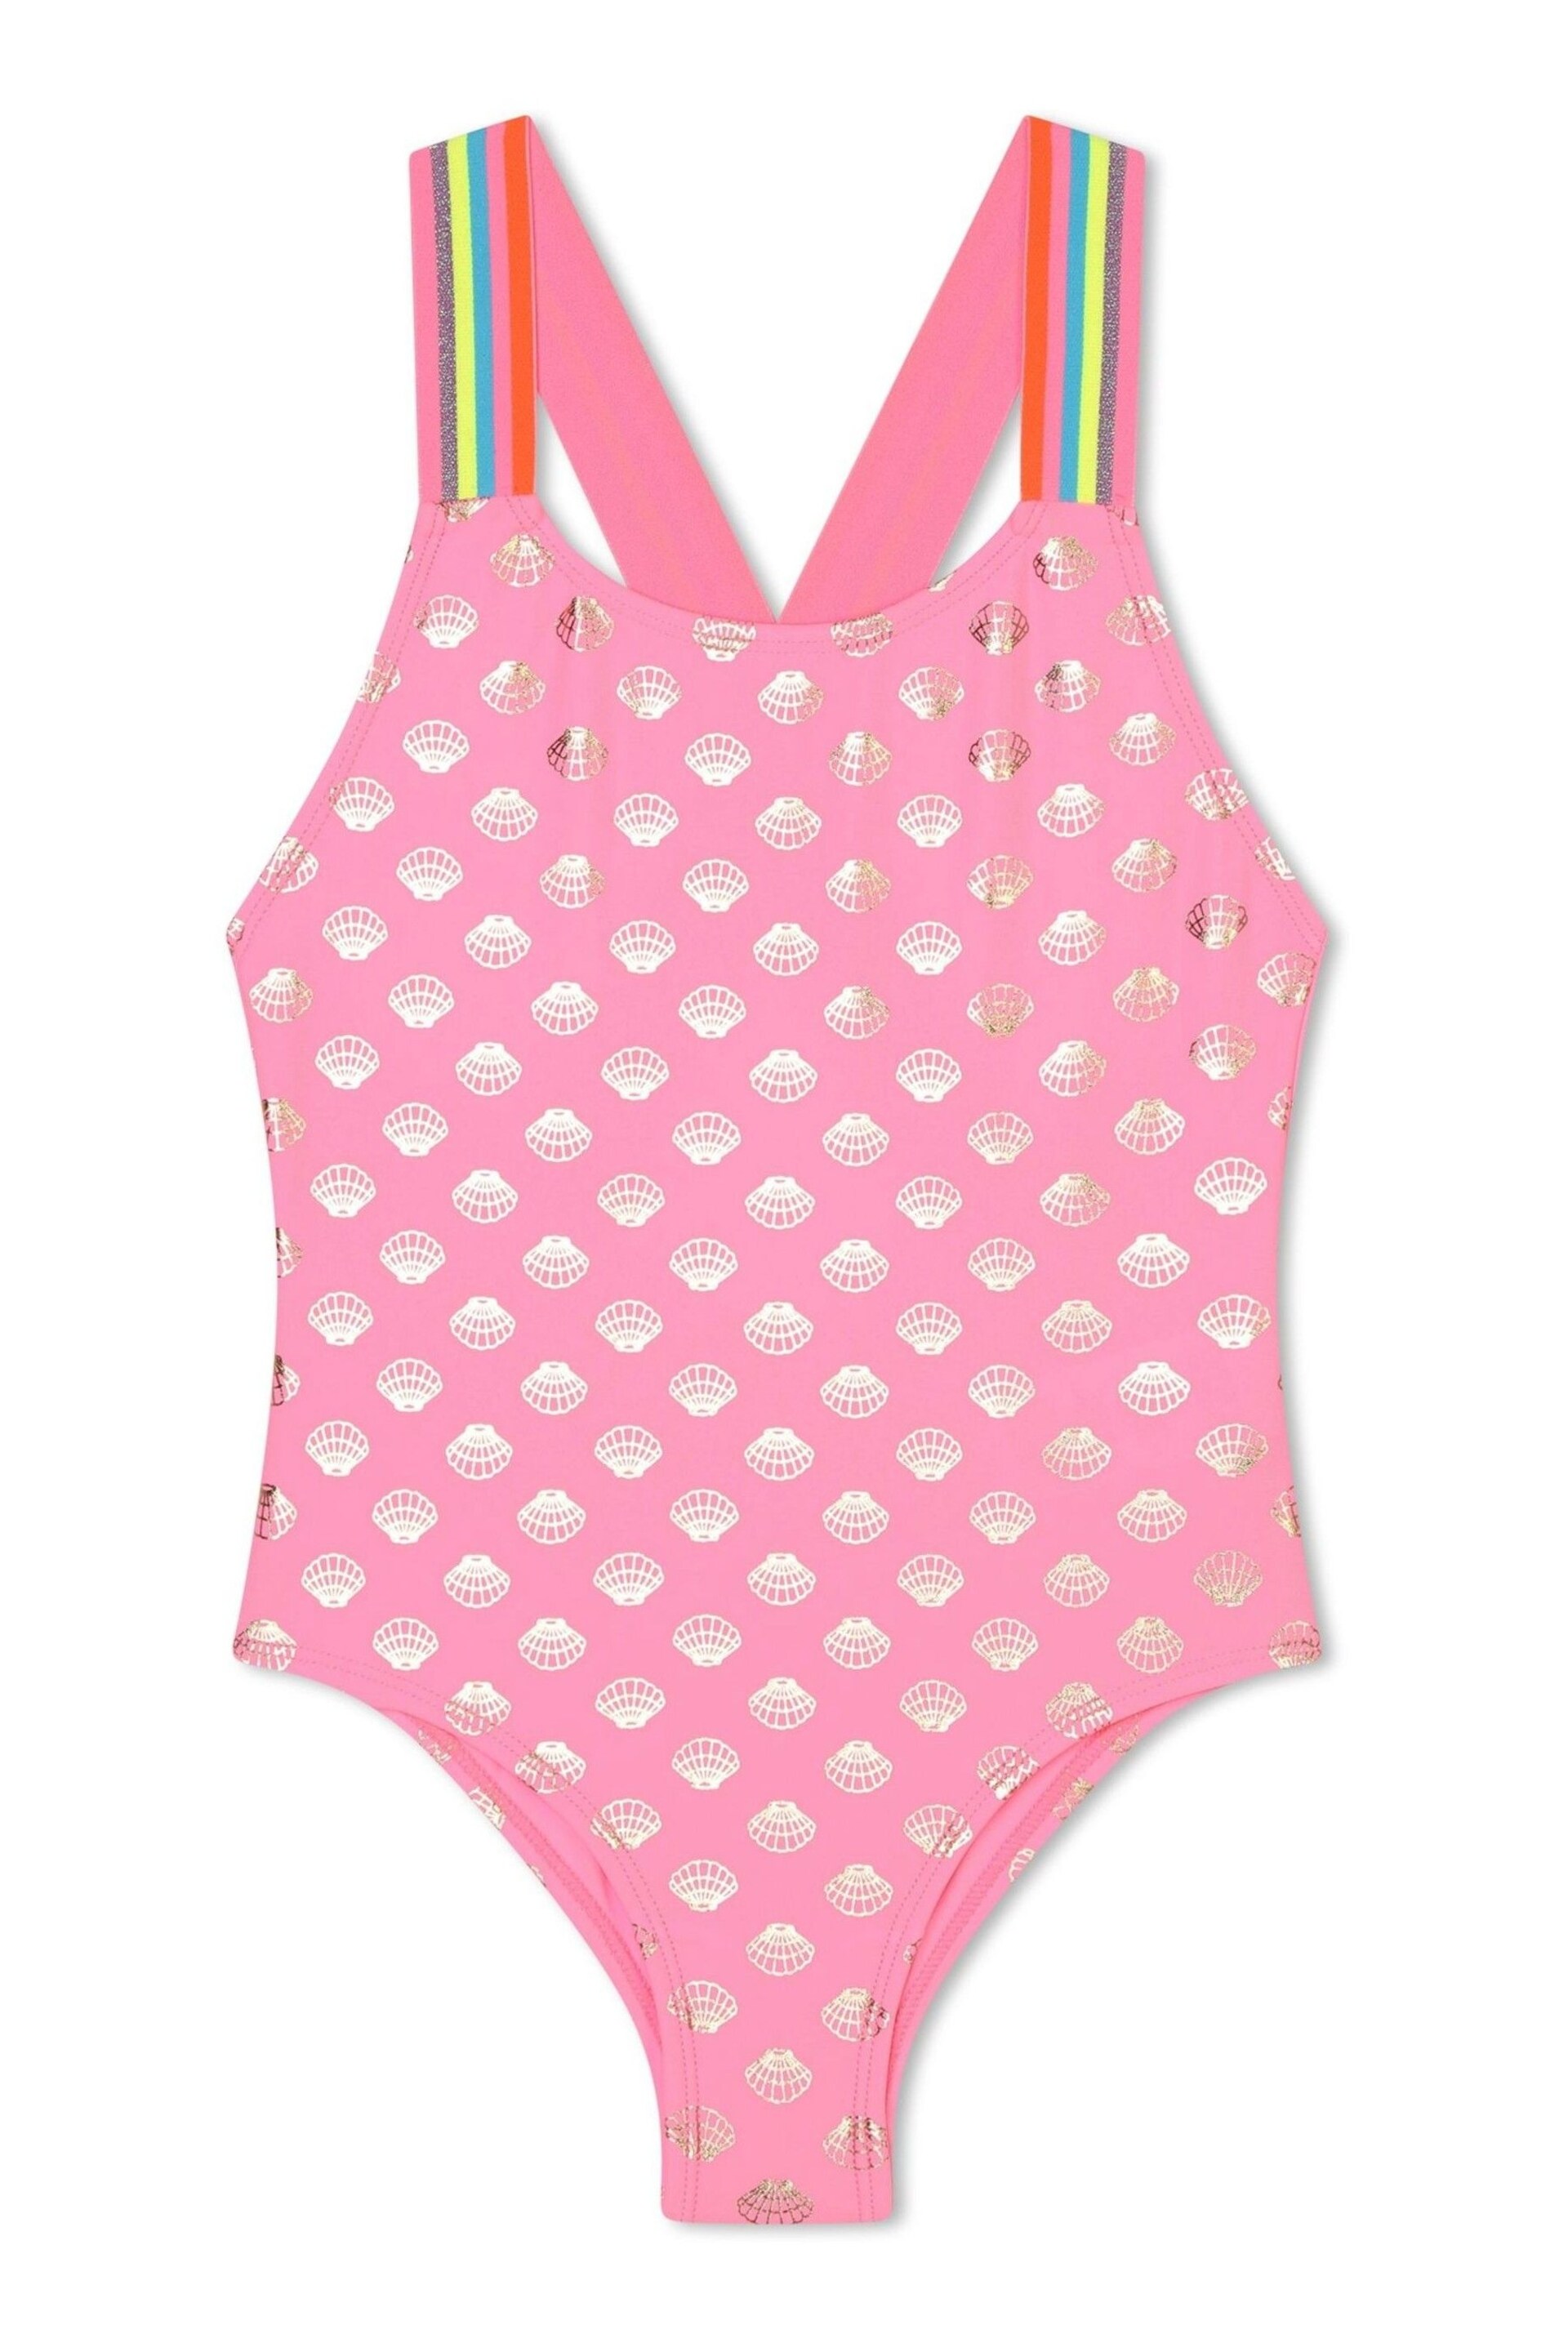 Billieblush Pink Swimsuit With Gold Foil Seashell Print - Image 1 of 3